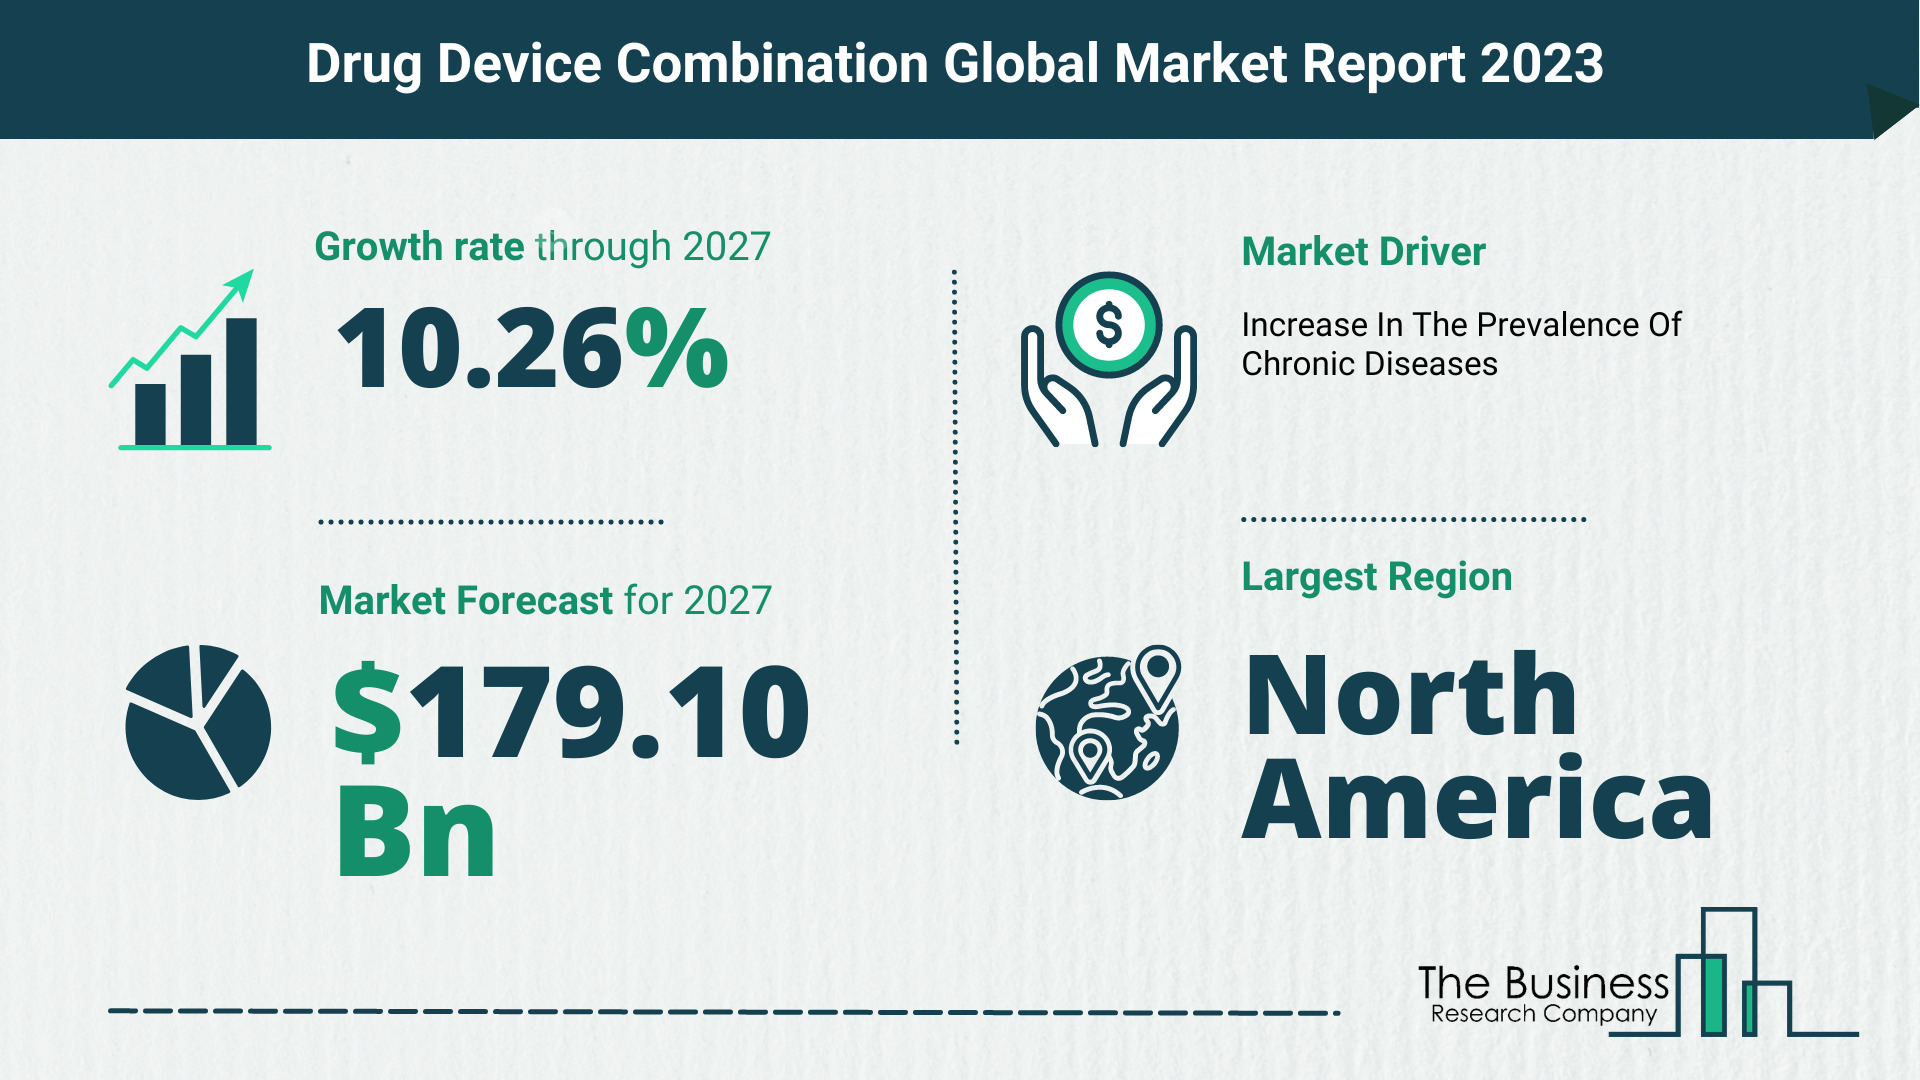 How Will The Drug Device Combination Market Globally Expand In 2023?